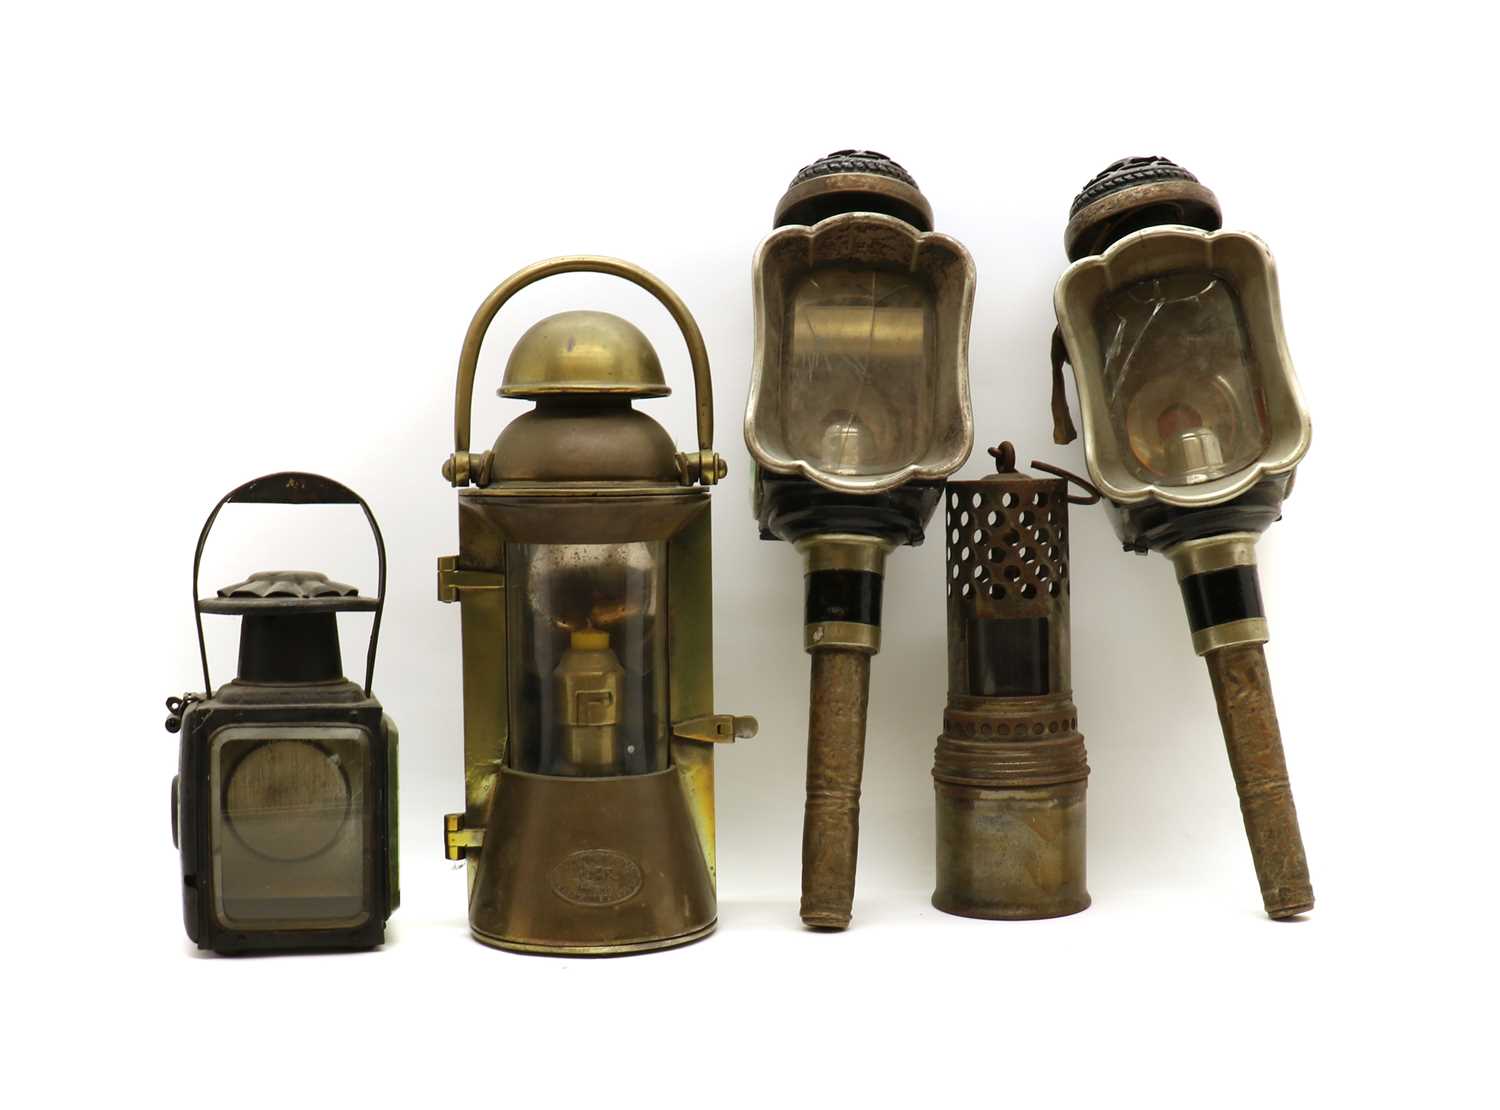 A pair of coach lamps